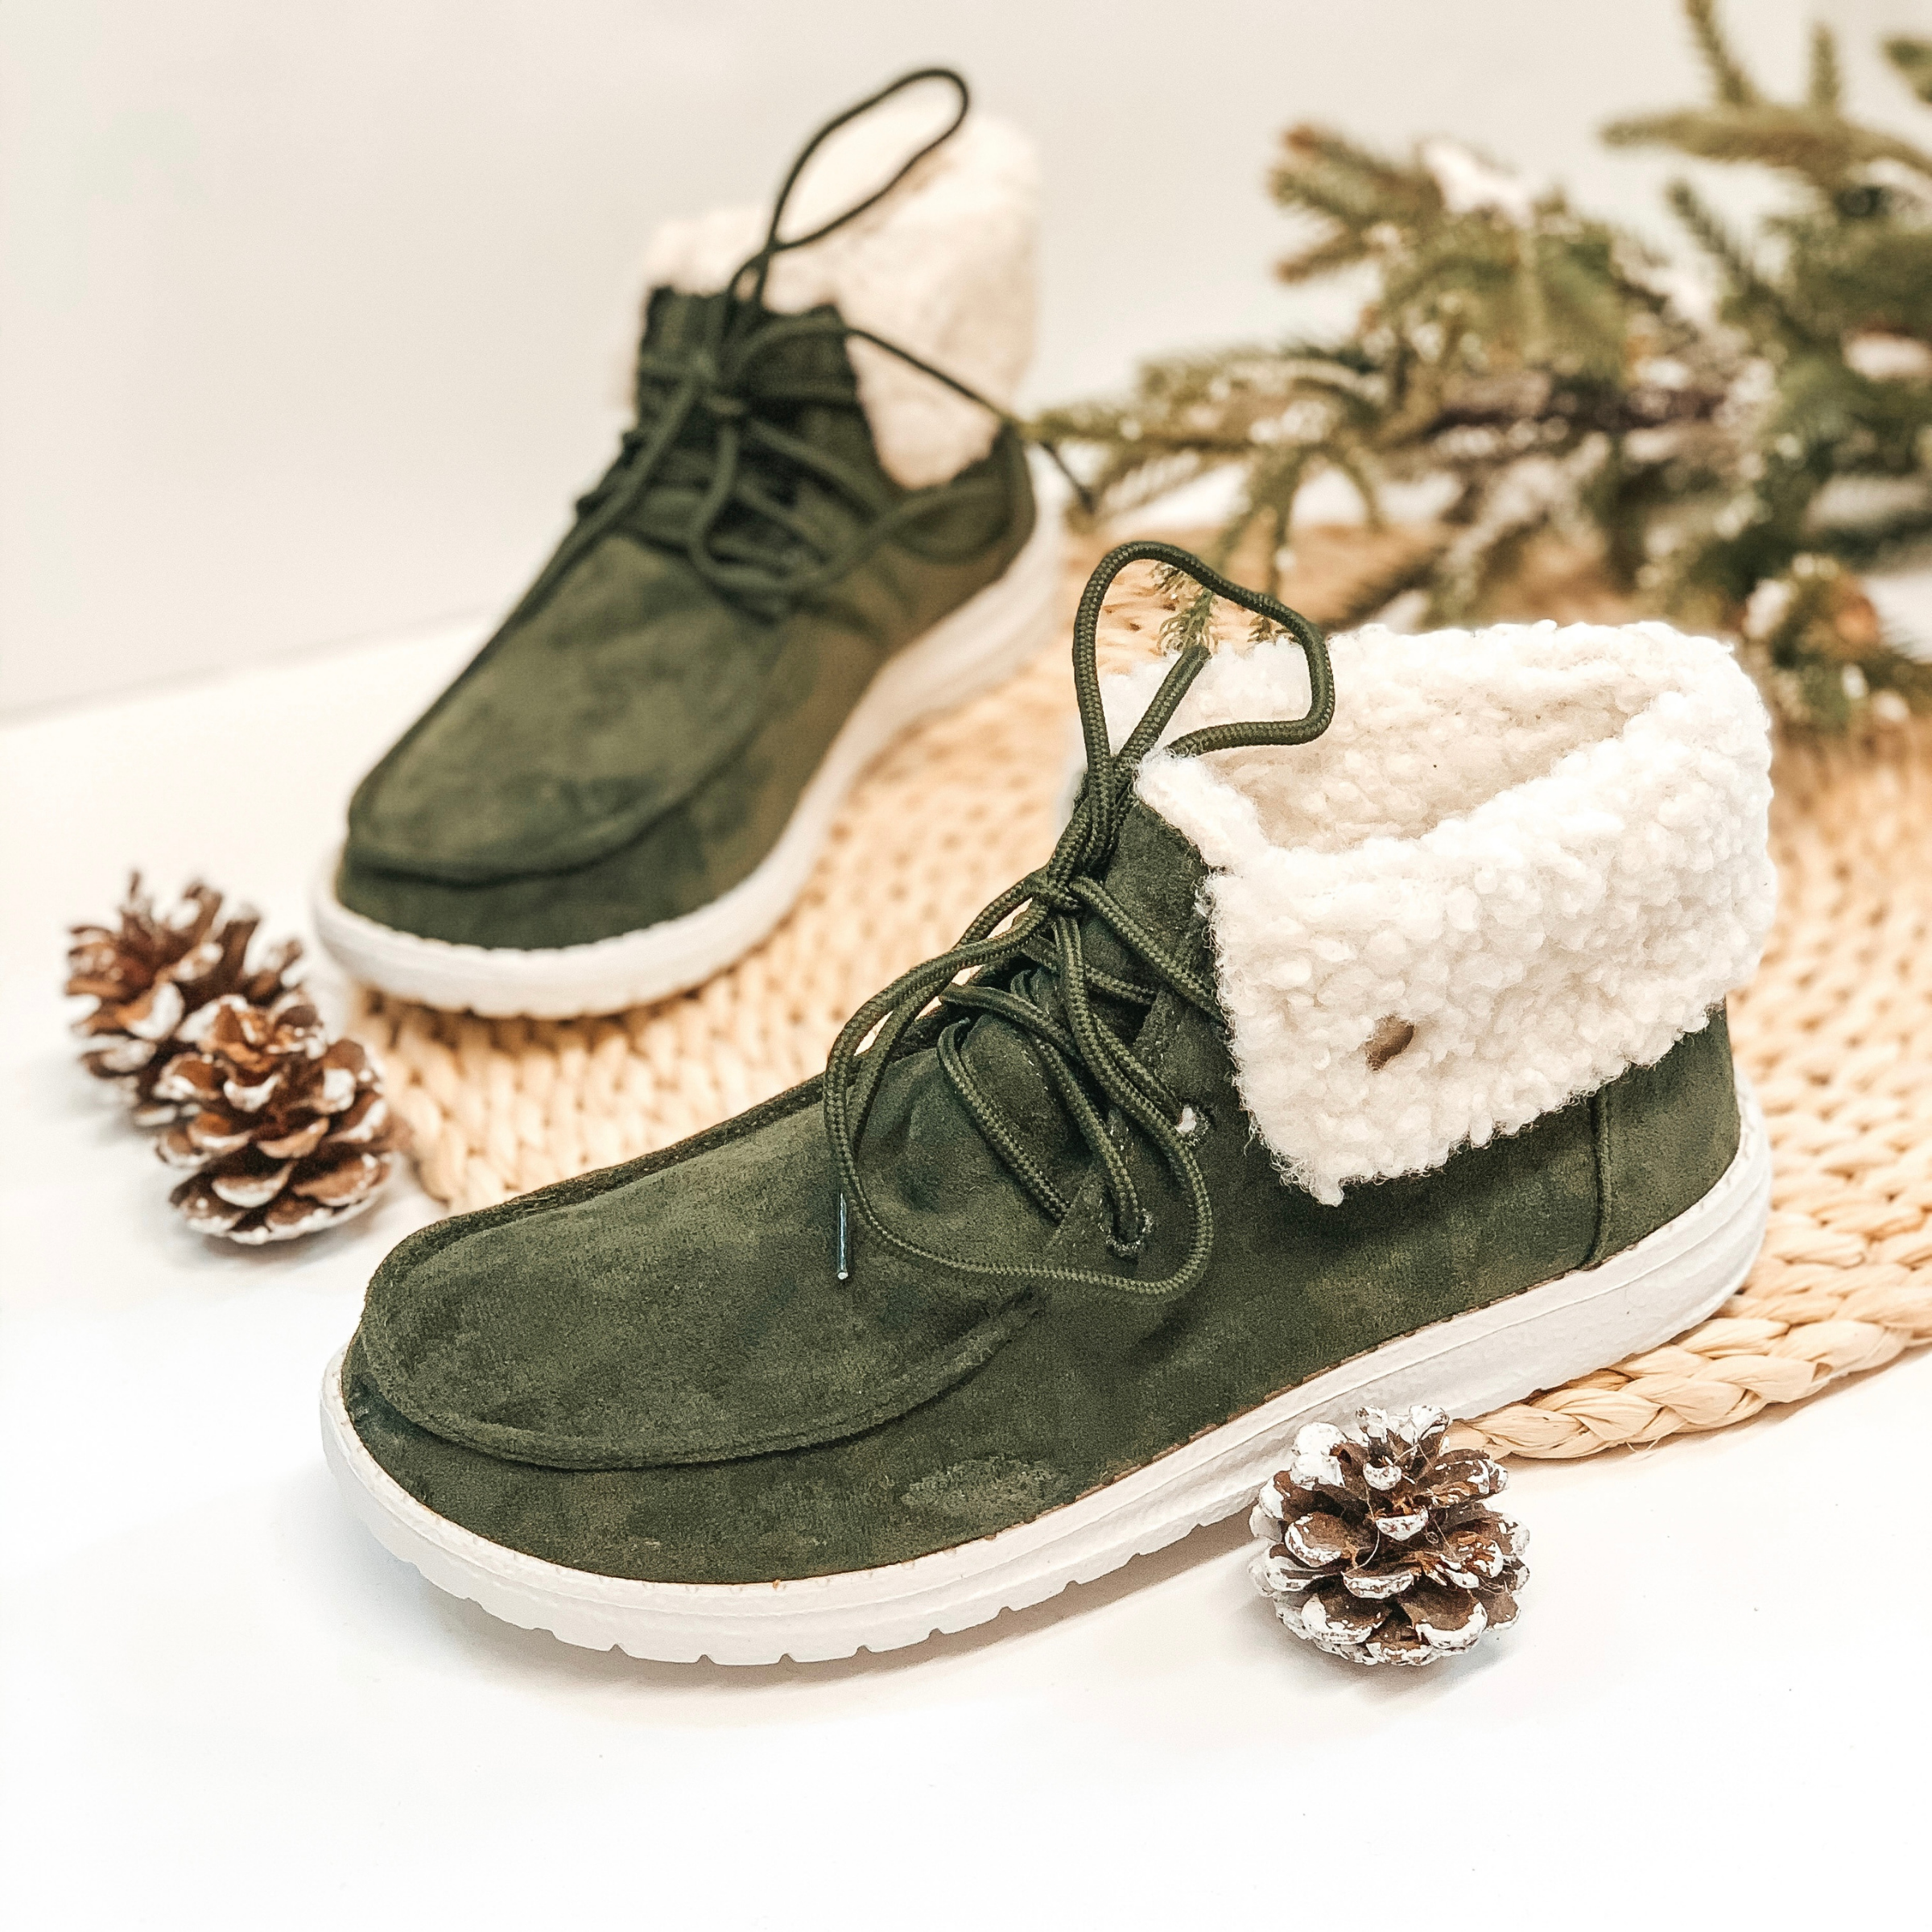 Very G | Have To Run High Top Slip On Loafers with Laces and Sherpa Lining in Olive - Giddy Up Glamour Boutique